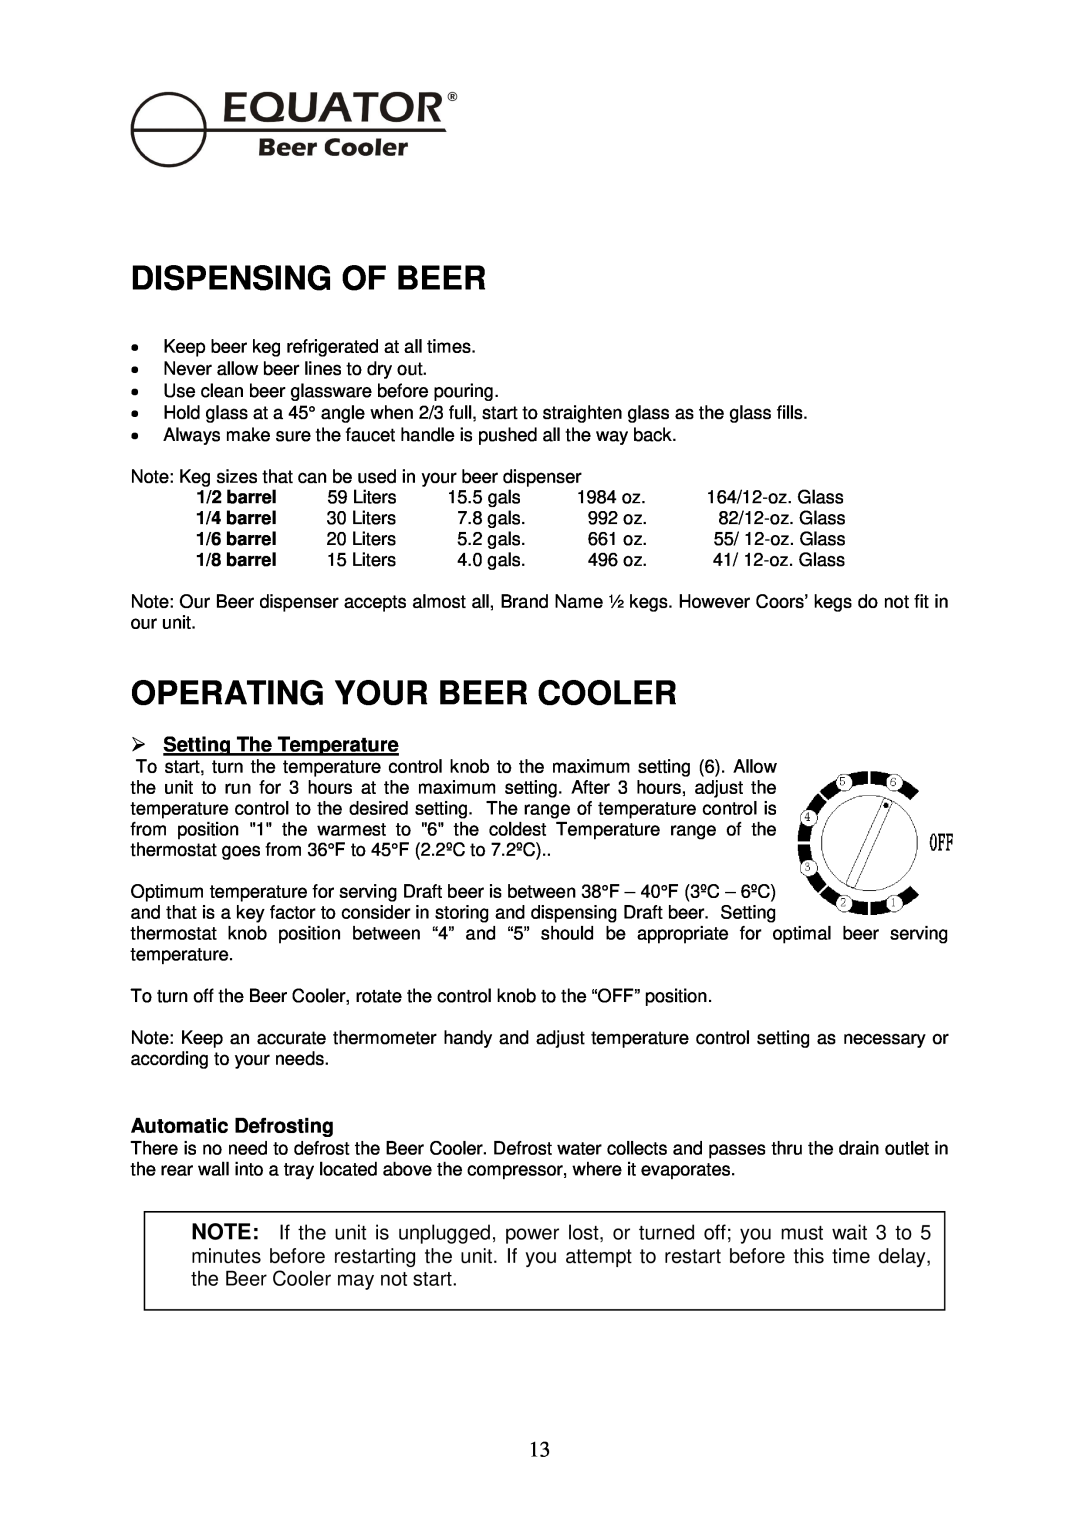 Equator BCR 500 Dispensing Of Beer, Operating Your Beer Cooler, ØSetting The Temperature, Automatic Defrosting, 1/2 barrel 